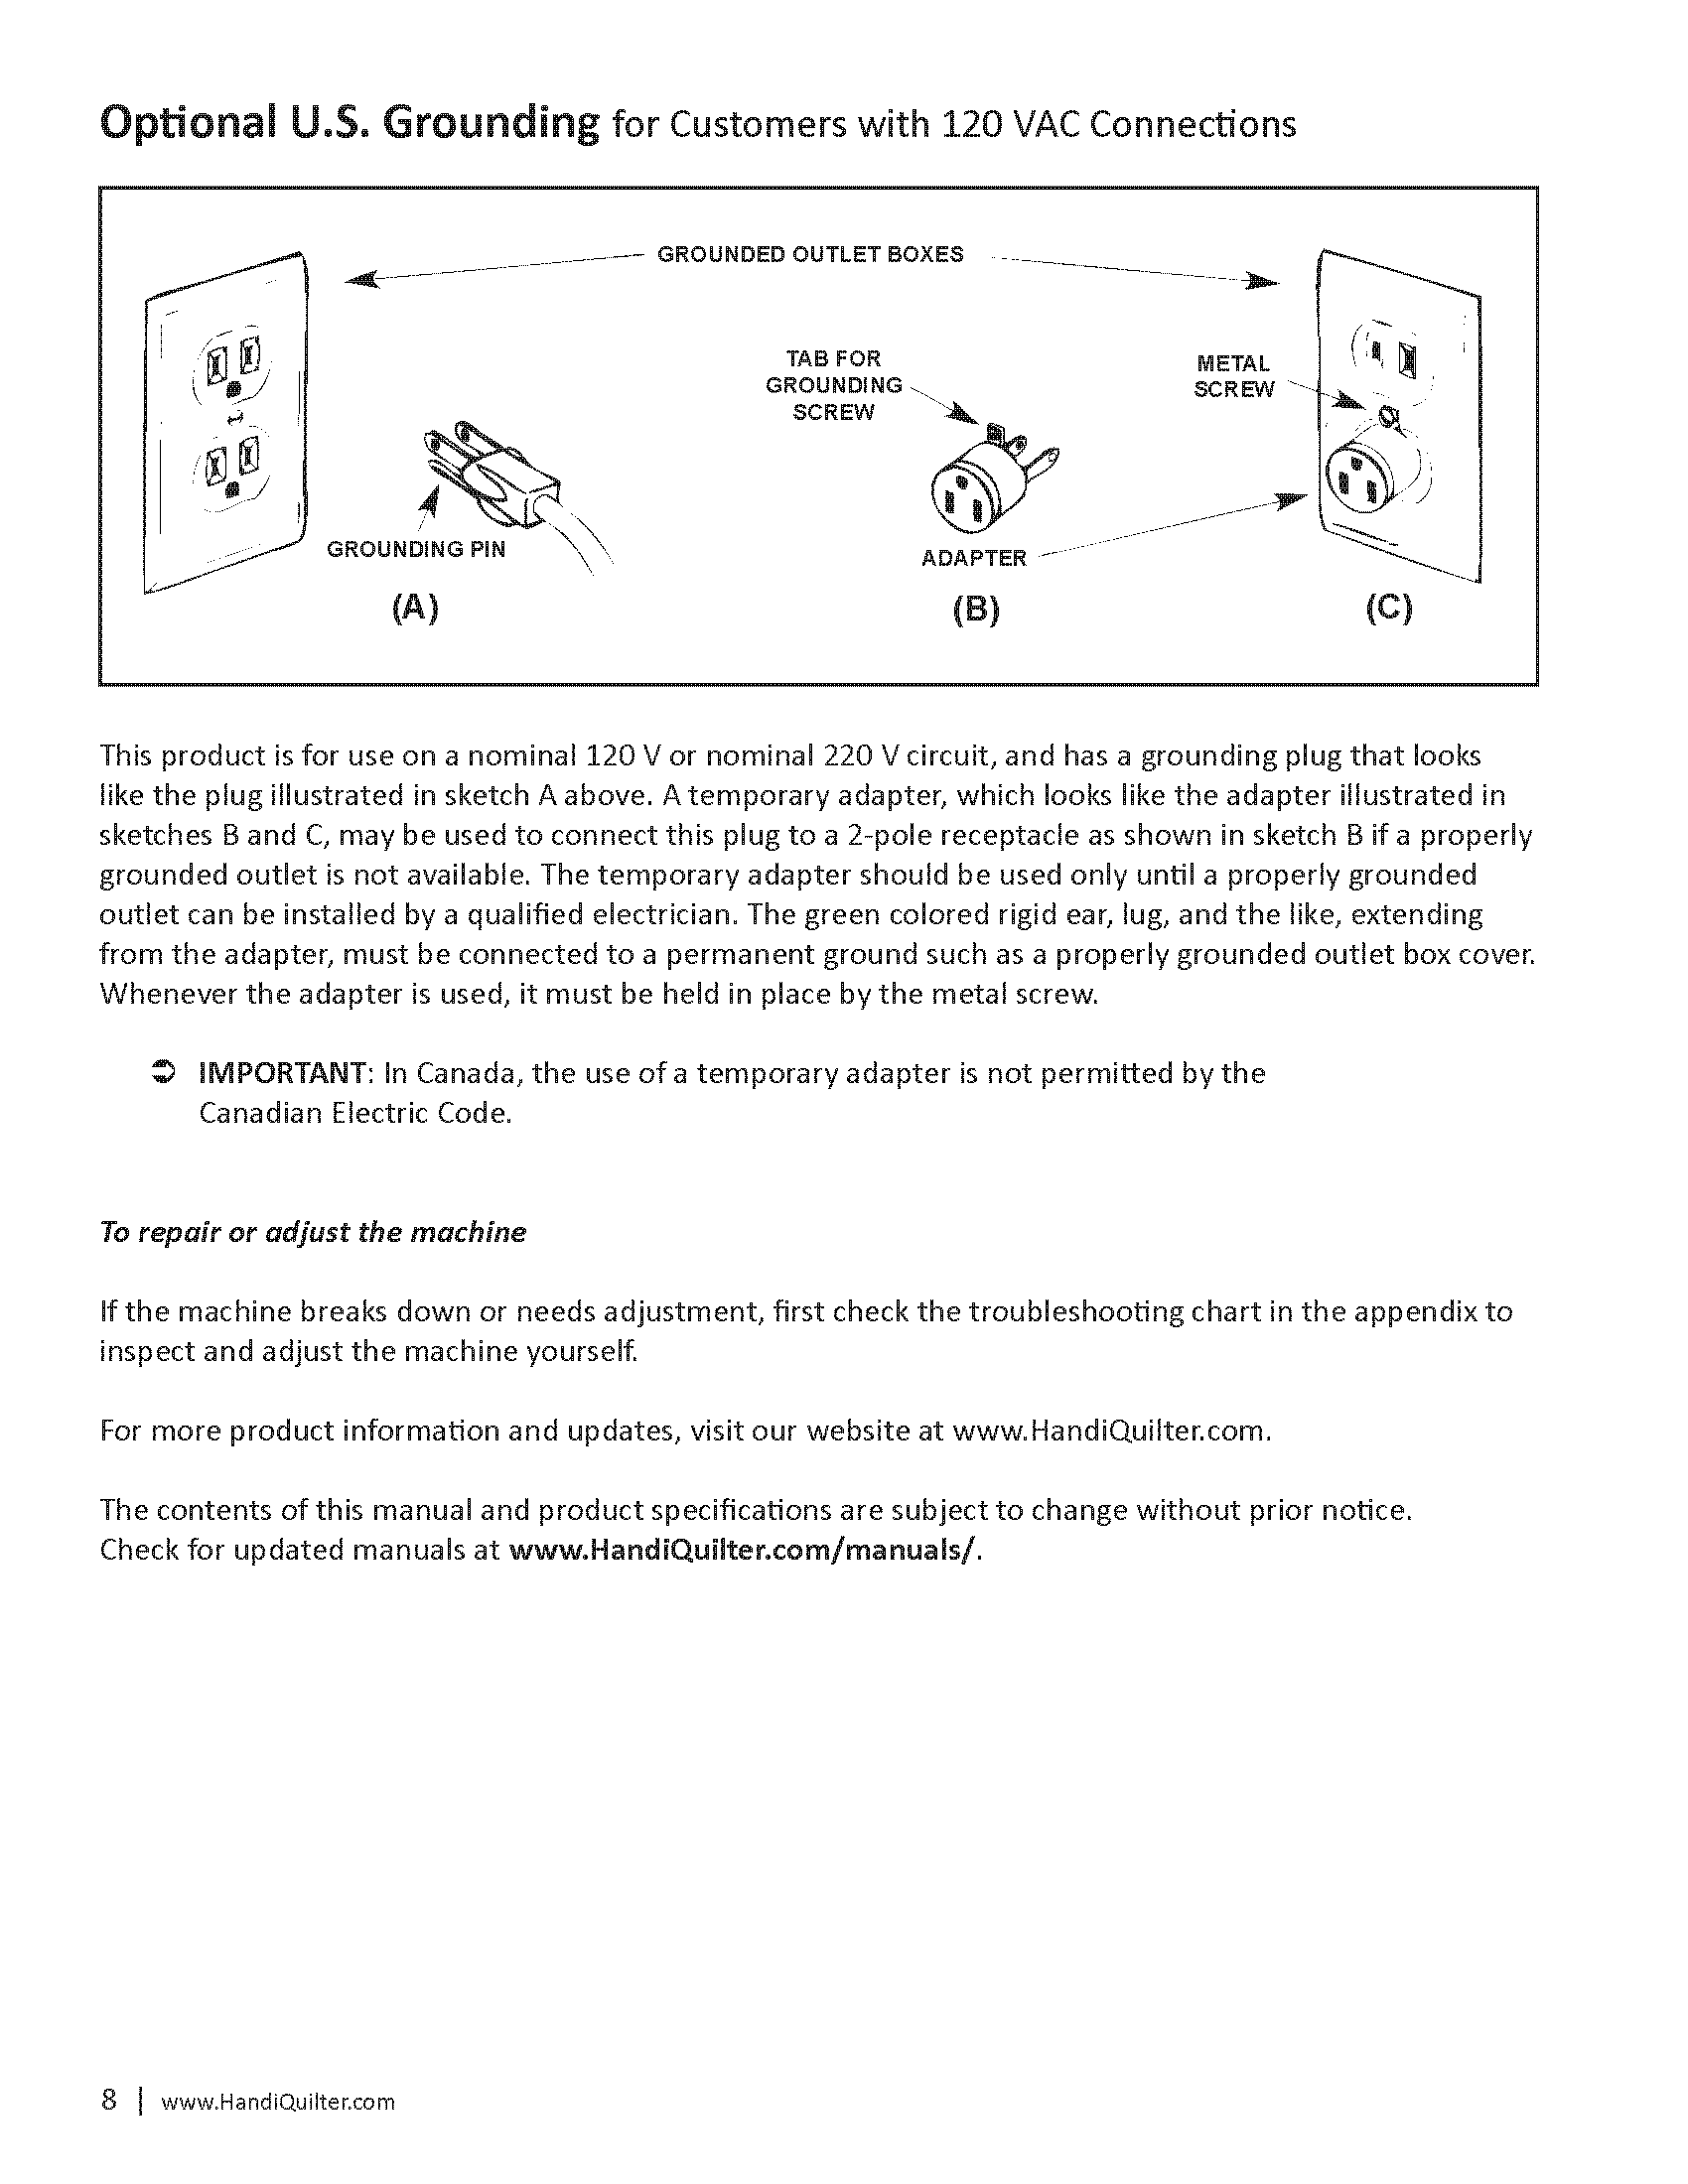 HQ-Forte-User-Manual-ALL-2_Page_09.png